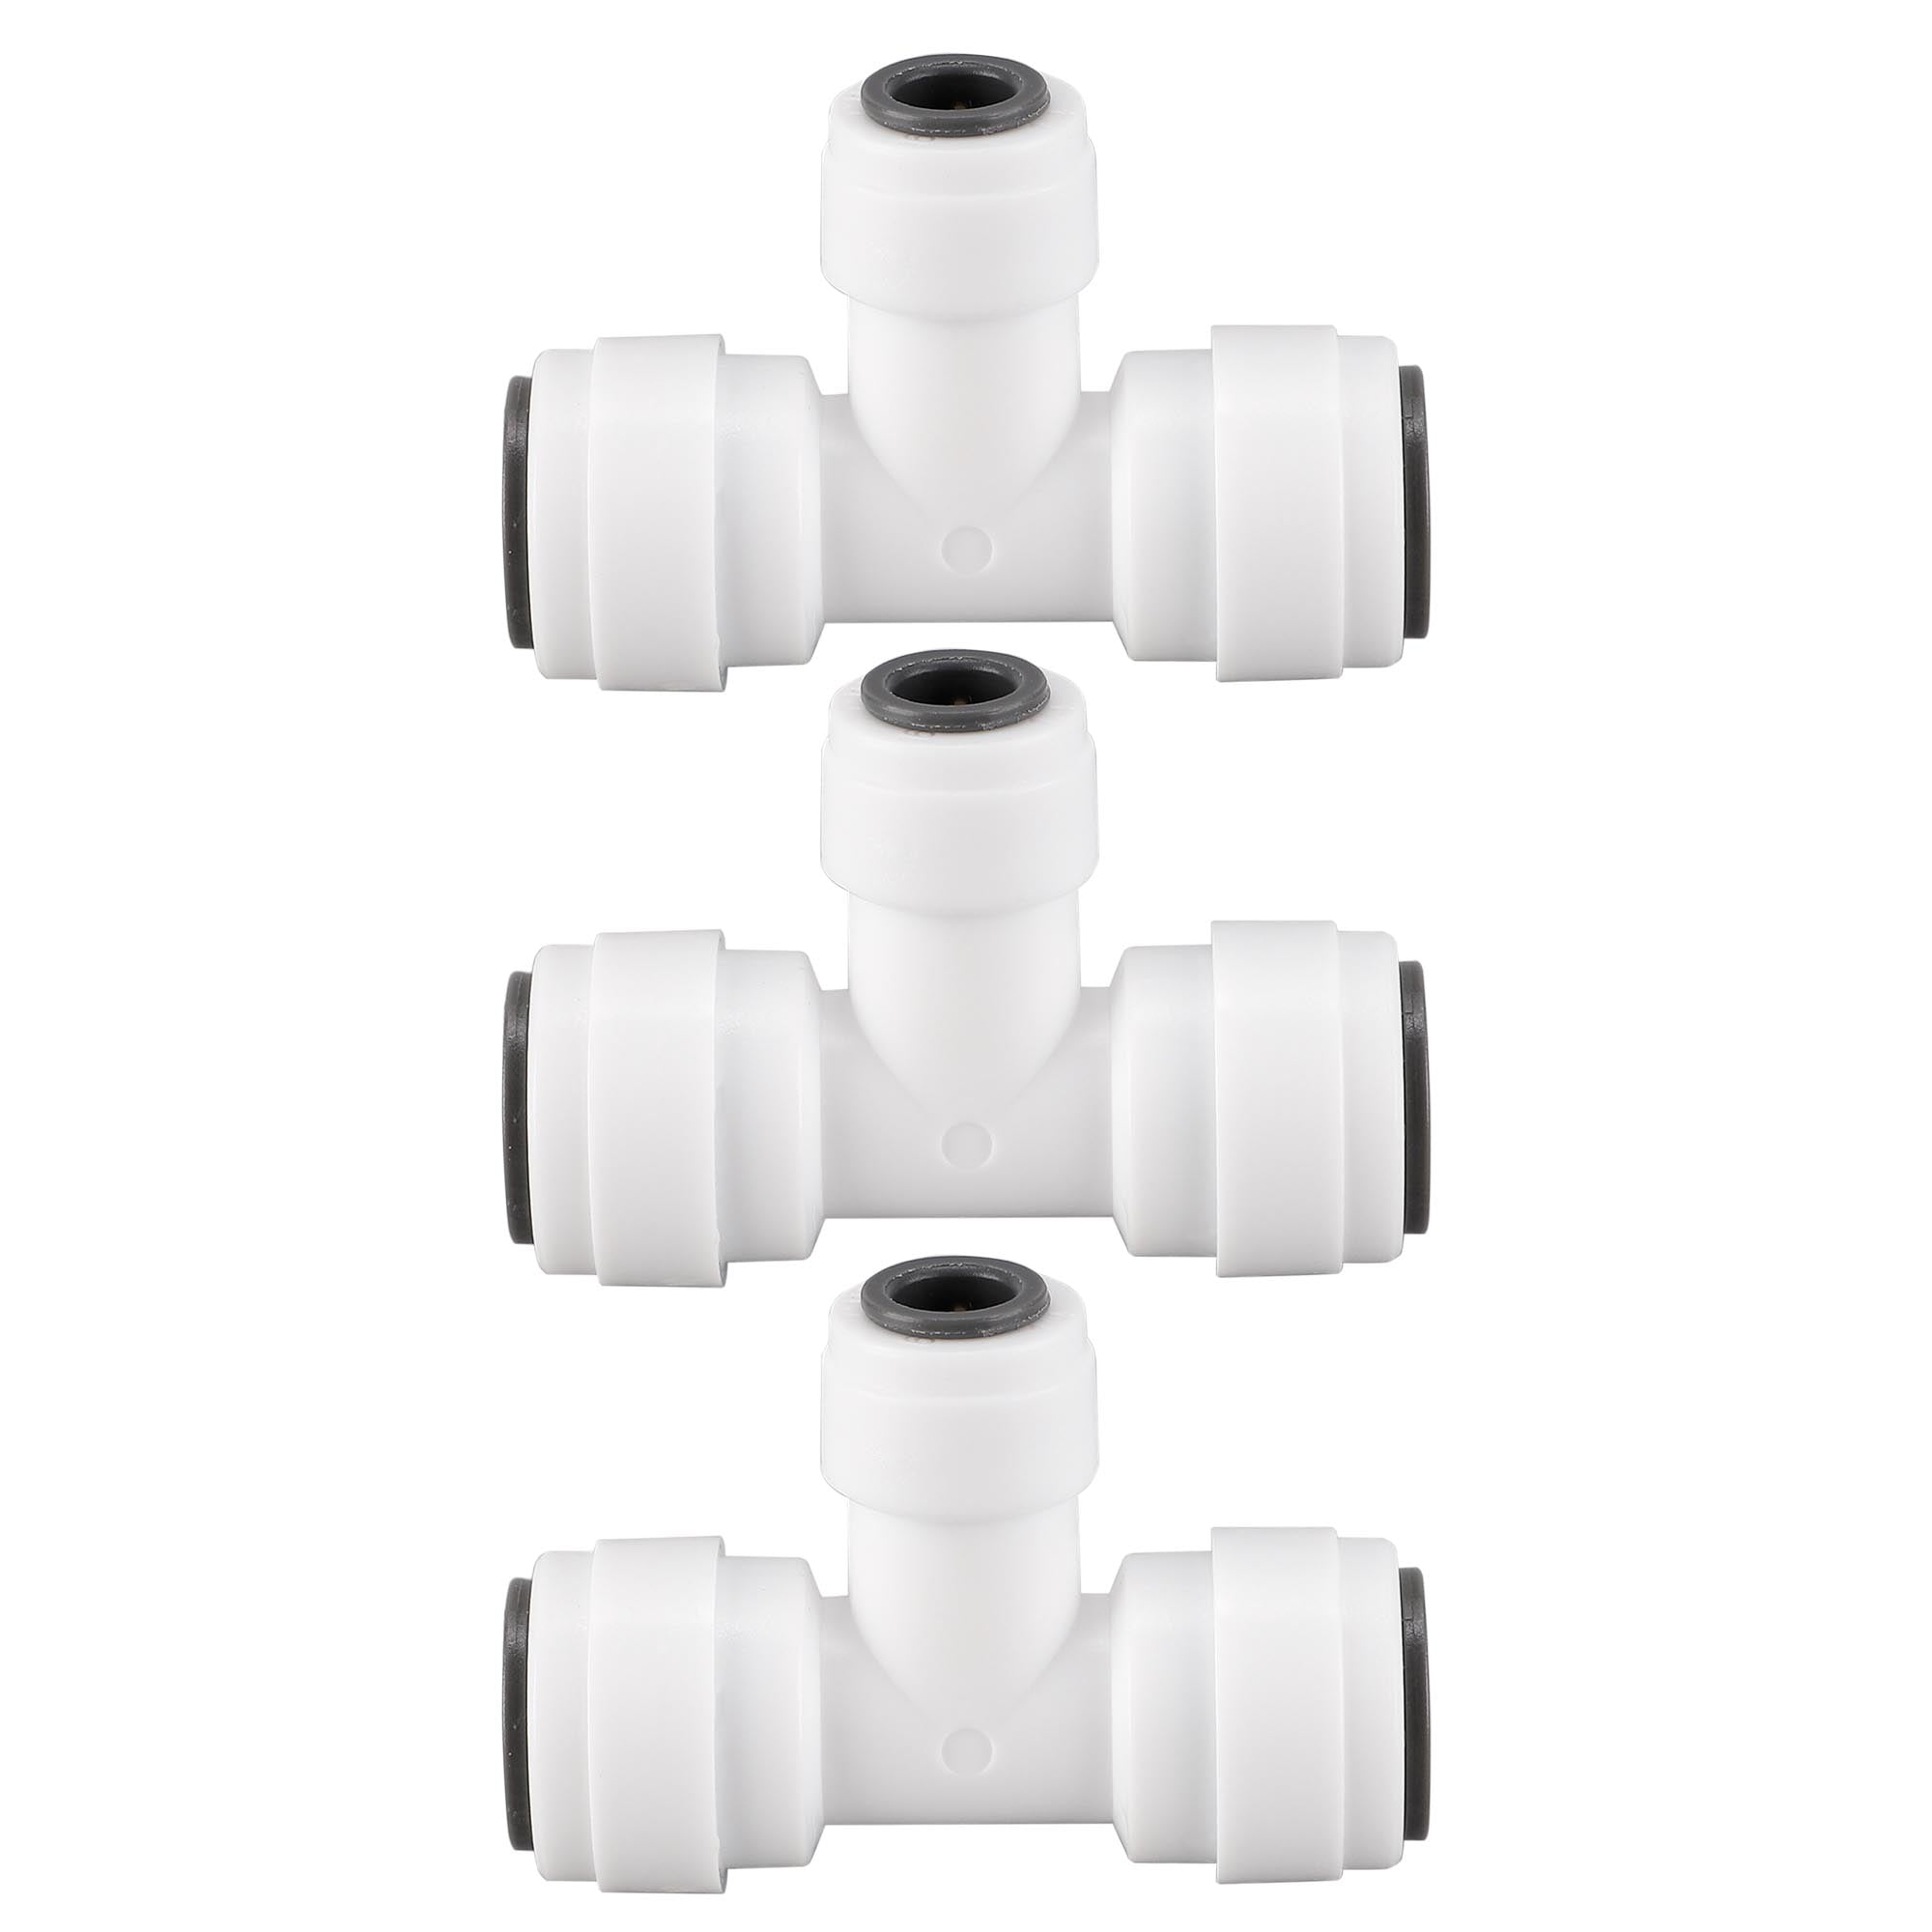 Tulead Quick Connect Fittings Straight Quick Connector Water Fittings Water Purifiers Quick Adapter 1/4 to 3/8 OD Tube Connector Fitting Pack of 10 